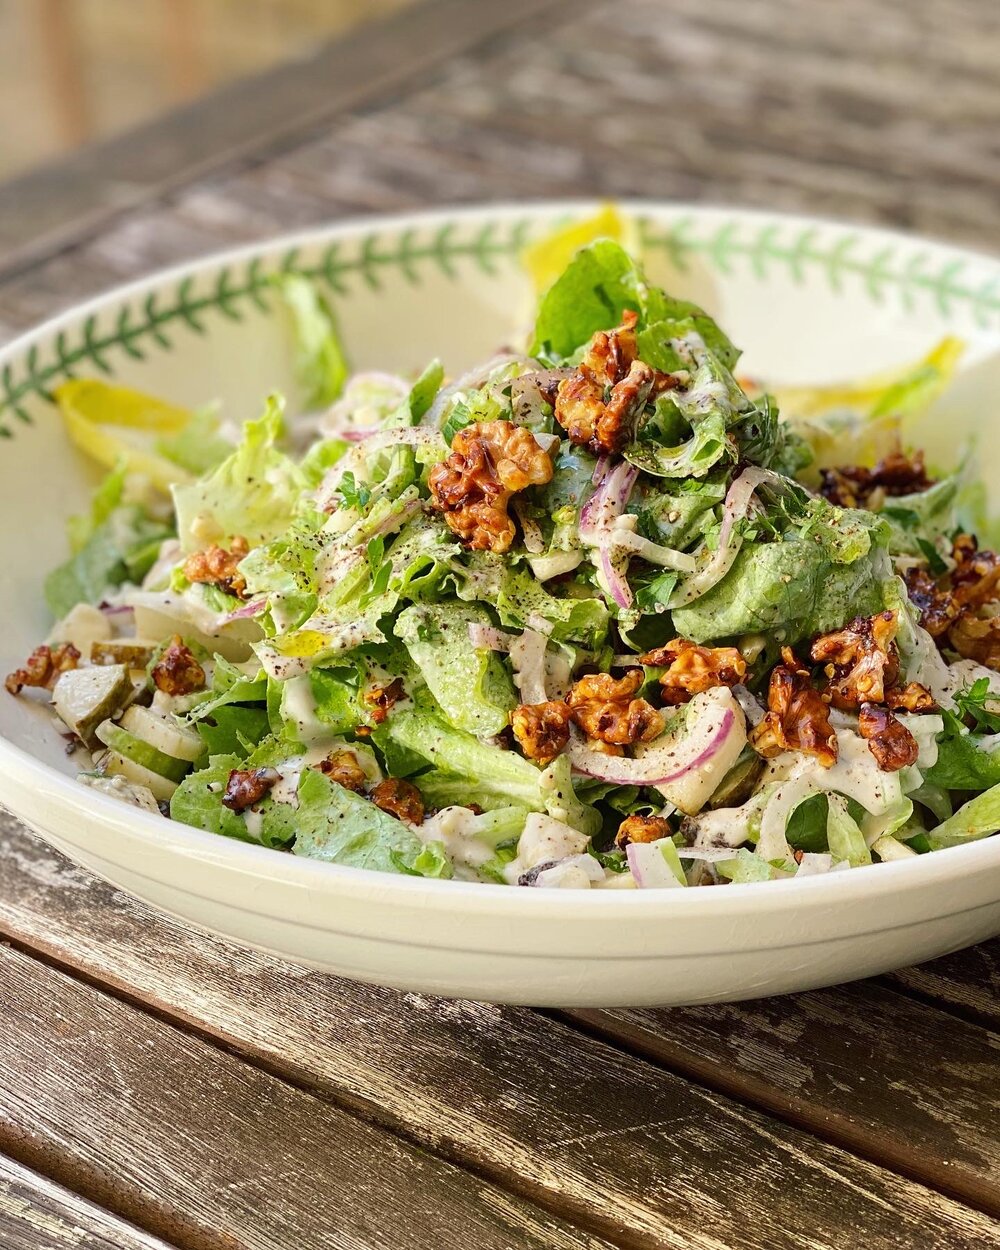 A waldorf salad with juicy pears and caramelised chilli walnuts